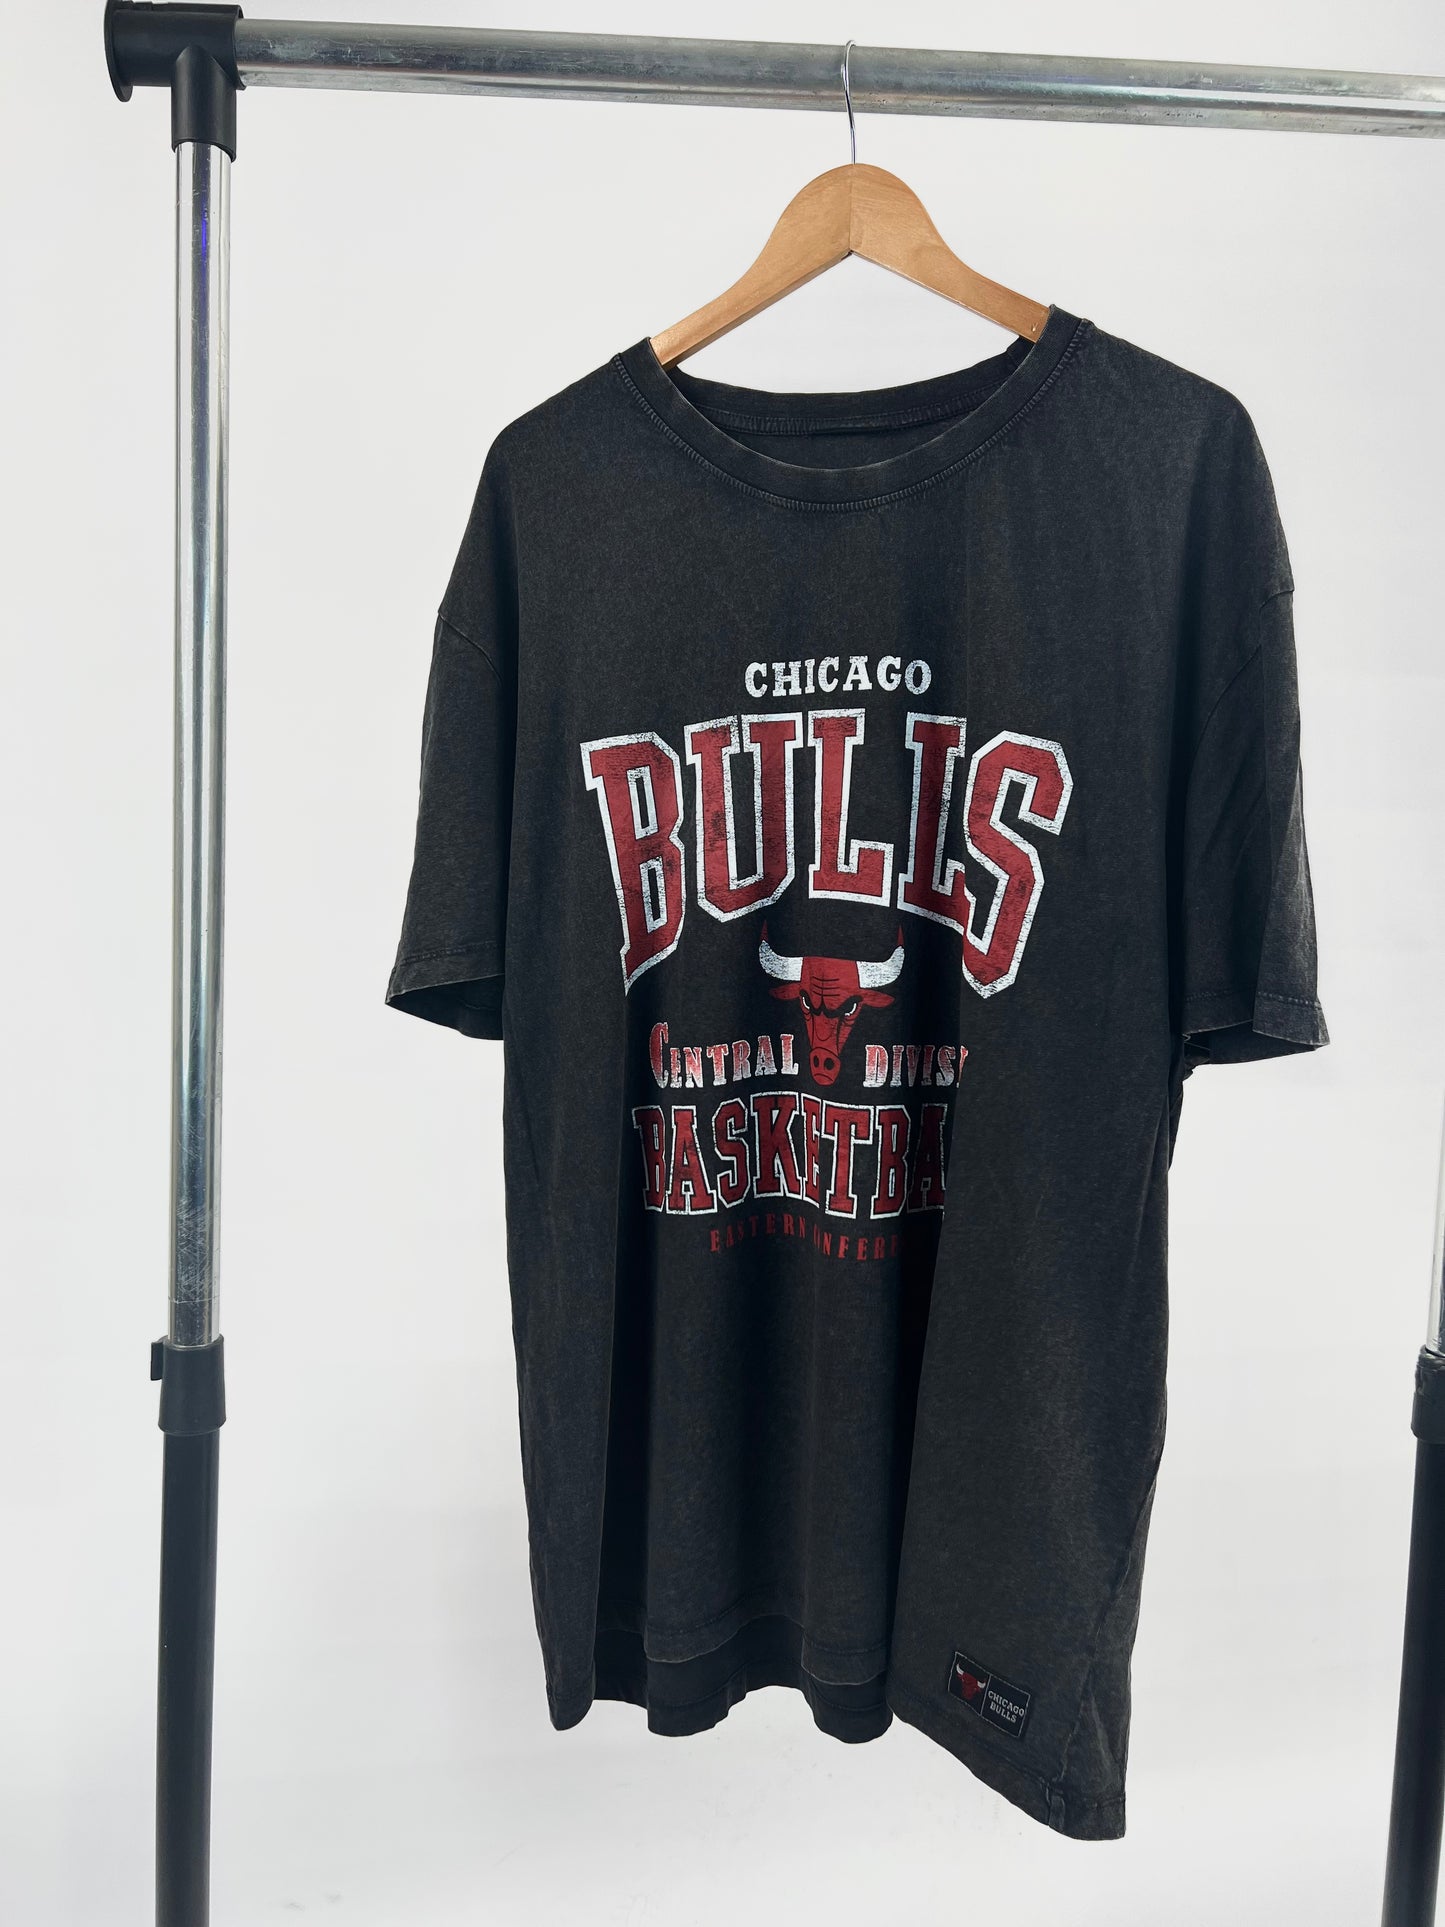 Chicago Bulls Graphic T-shirt in washed black